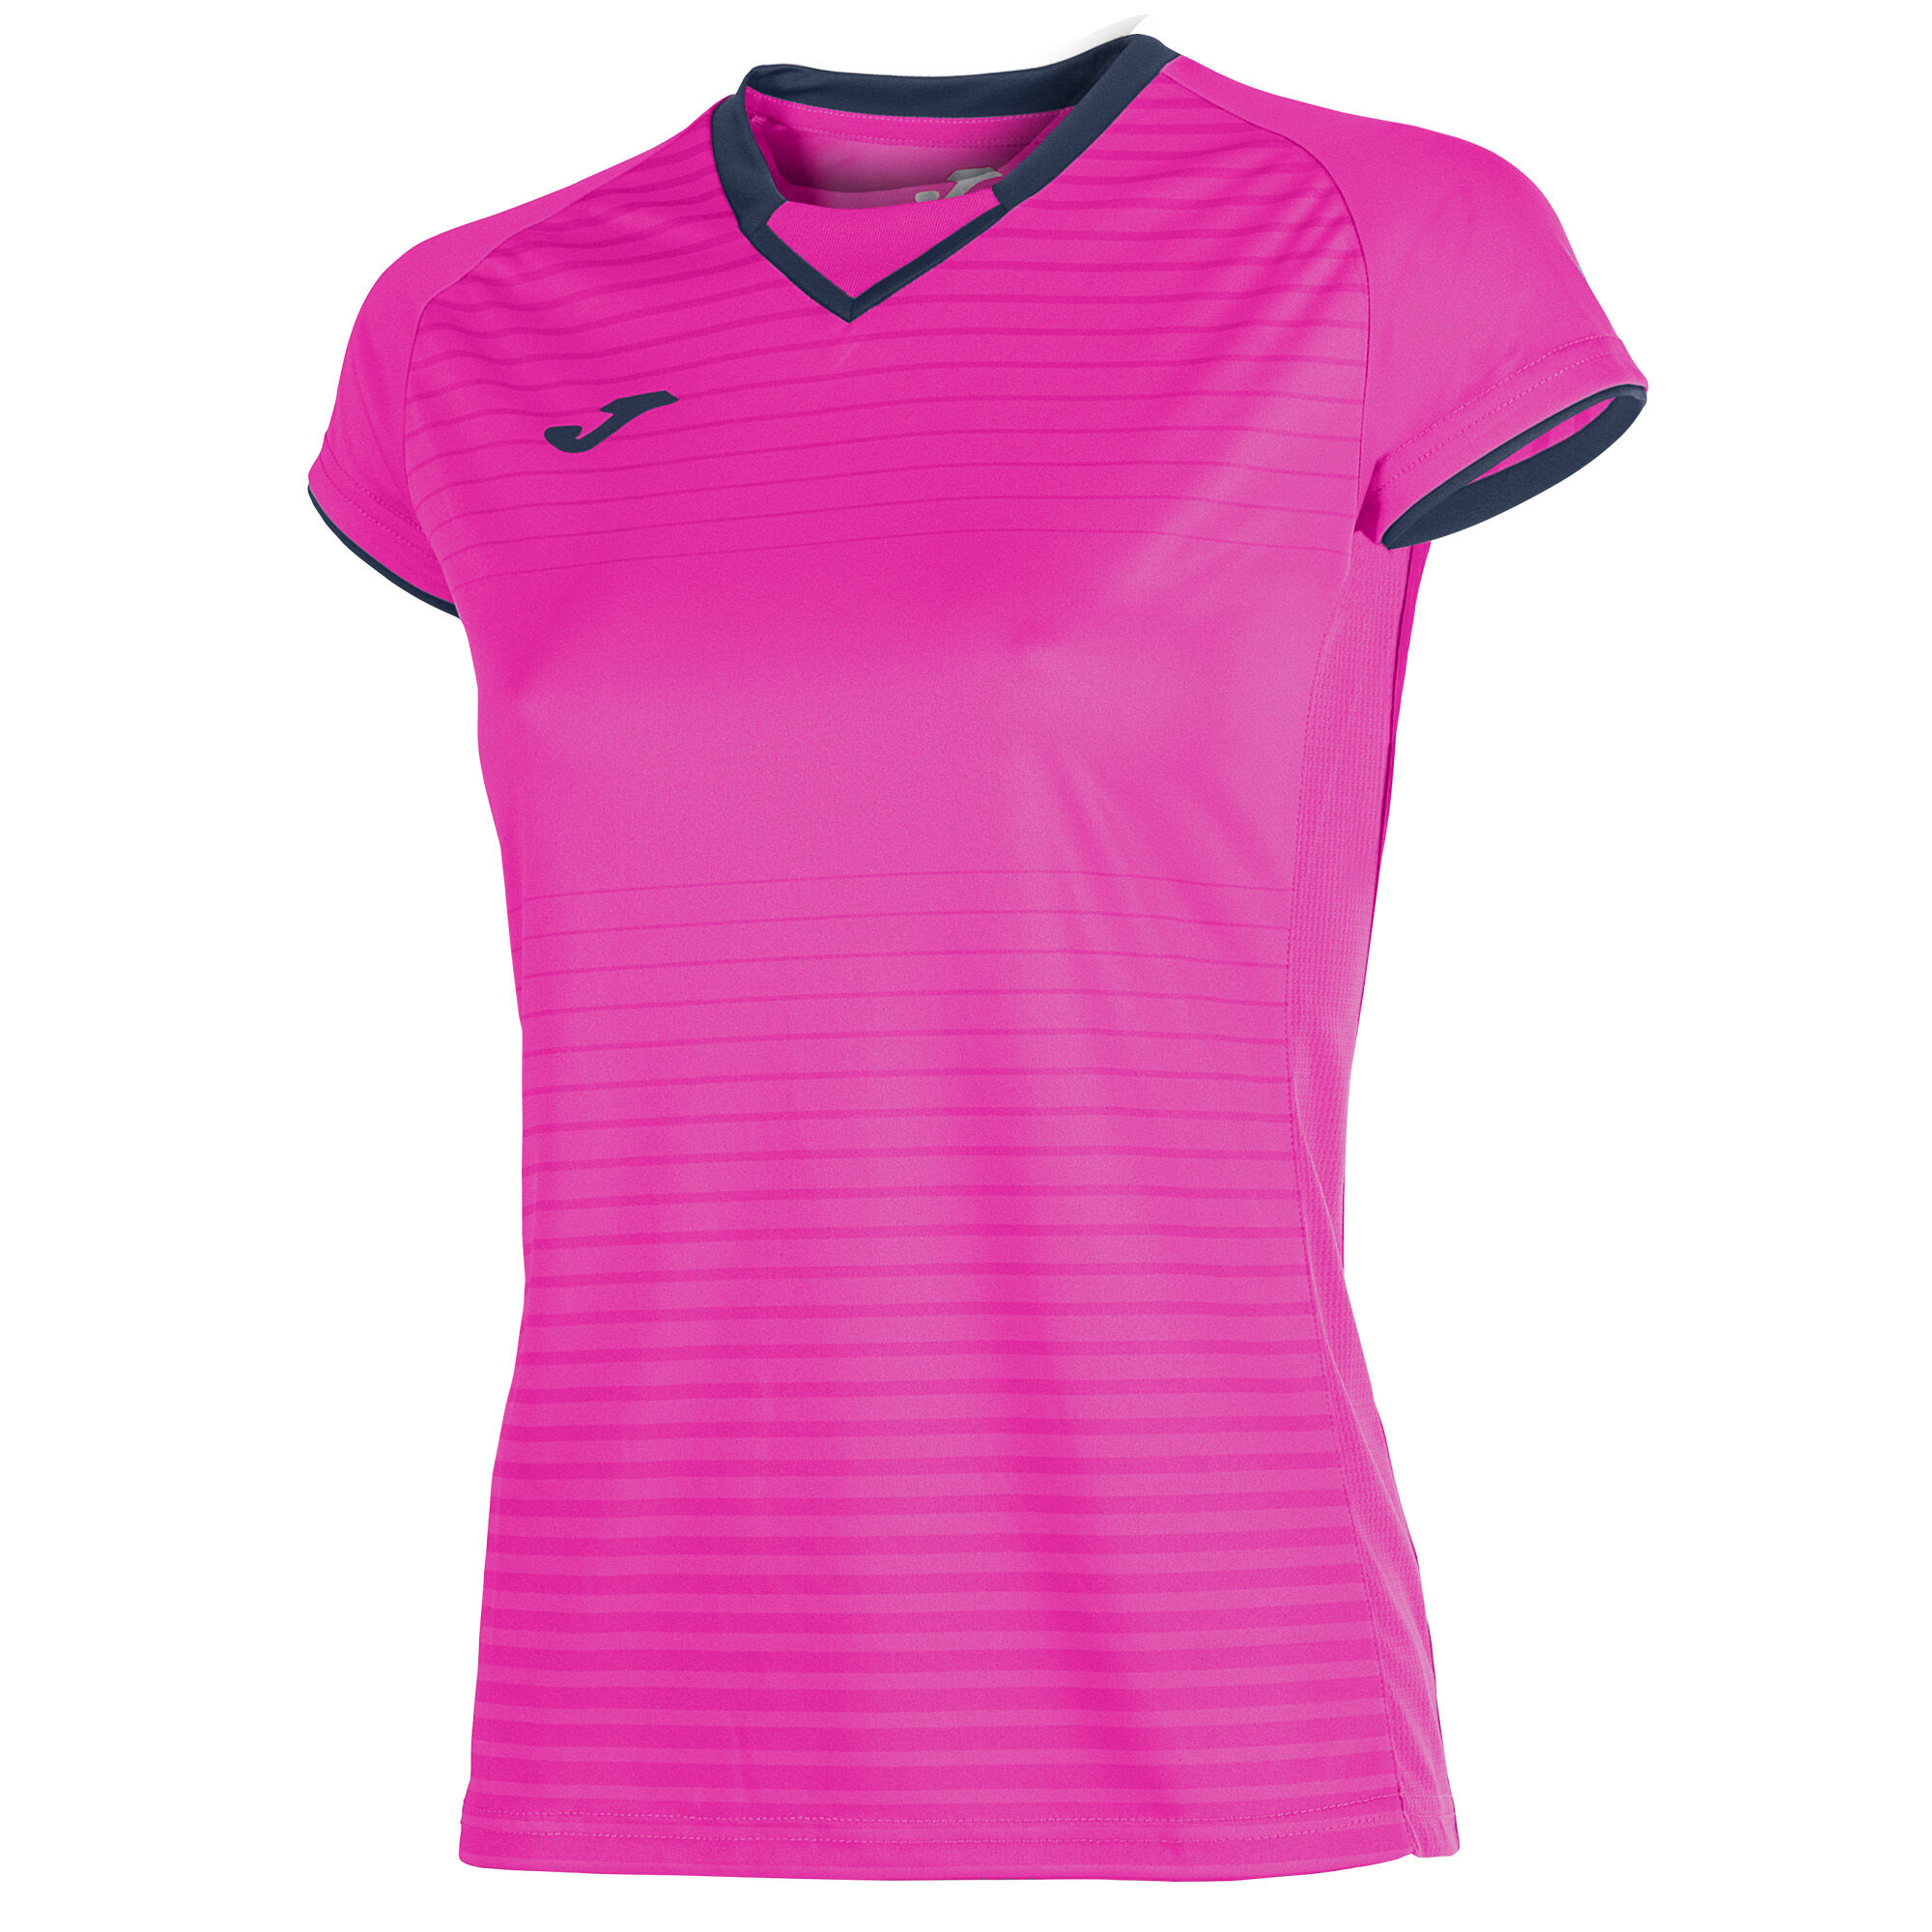 MAILLOT MANCHES COURTES FEMME GALAXY ROSE